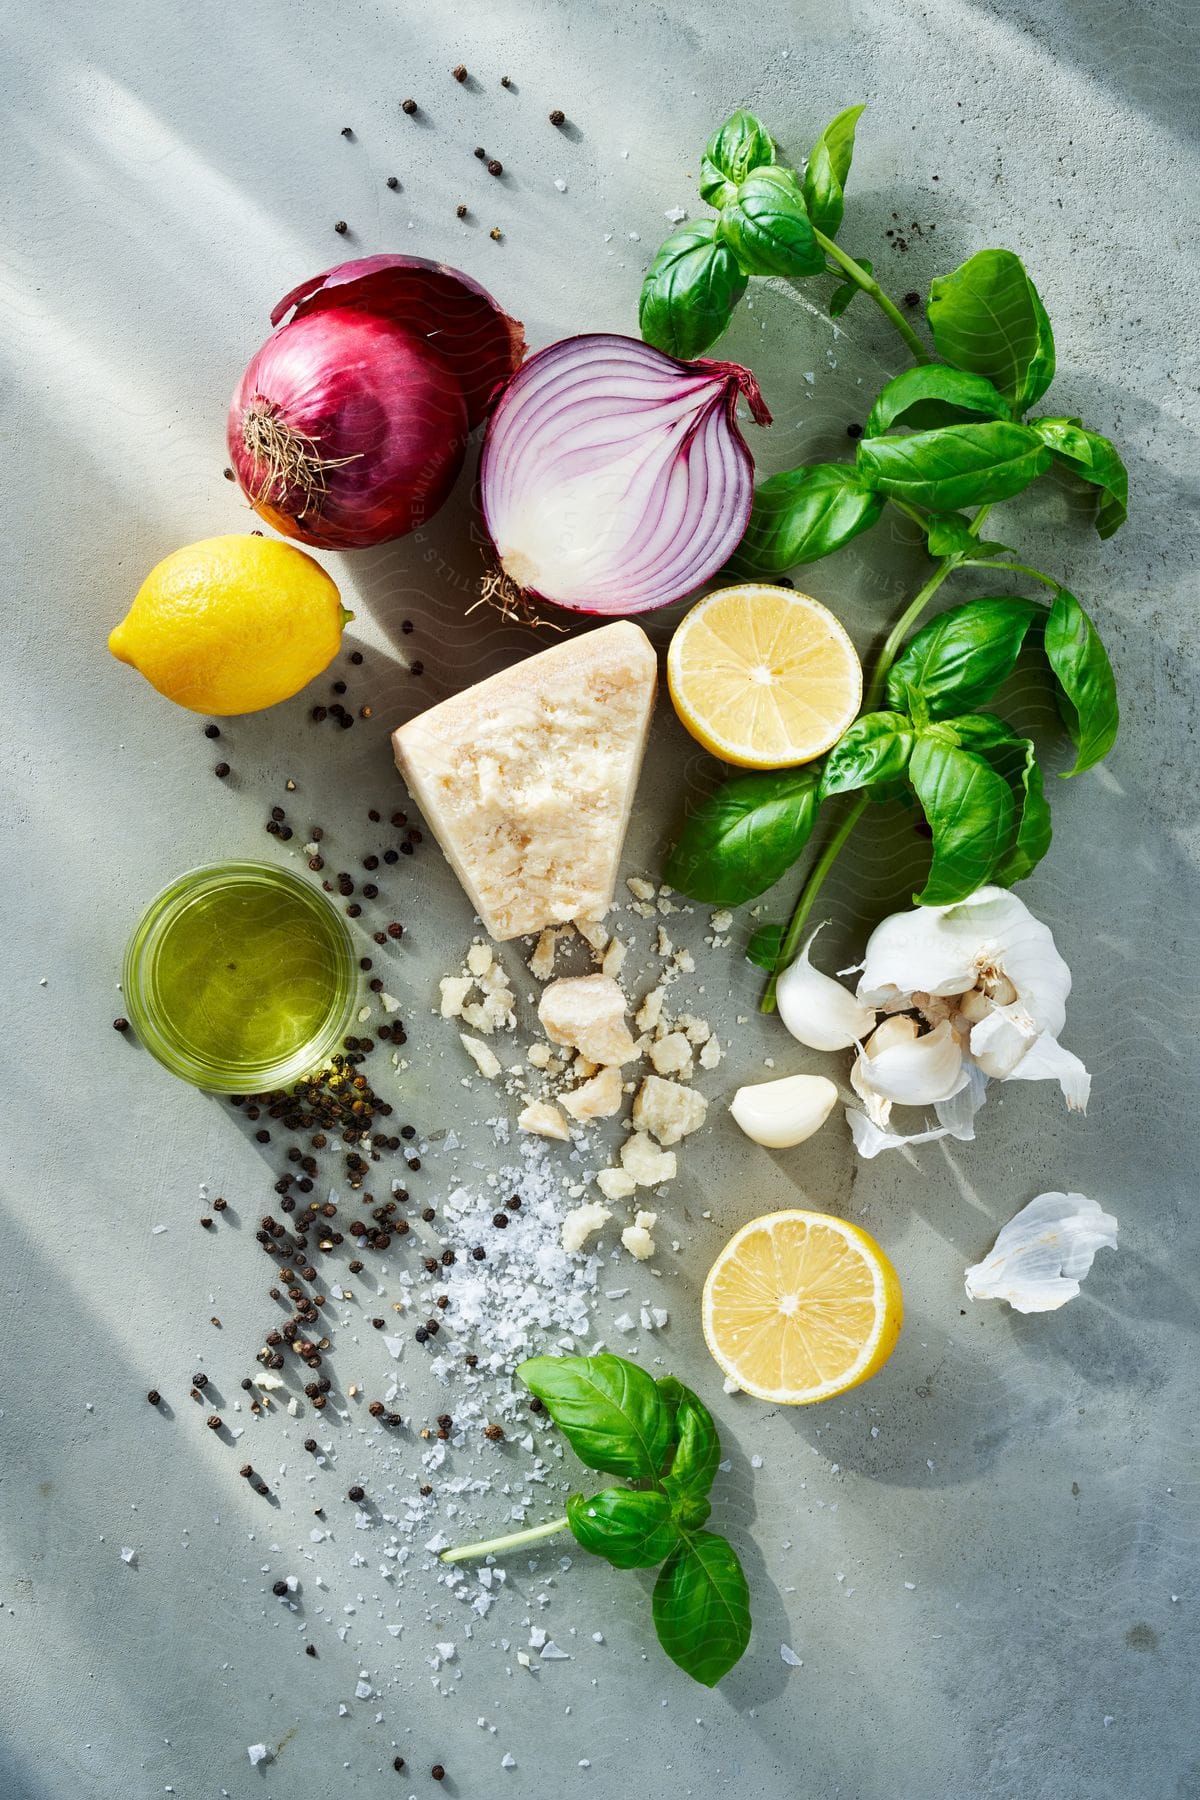 Red onions and lemons with garlic and other ingredients on a table